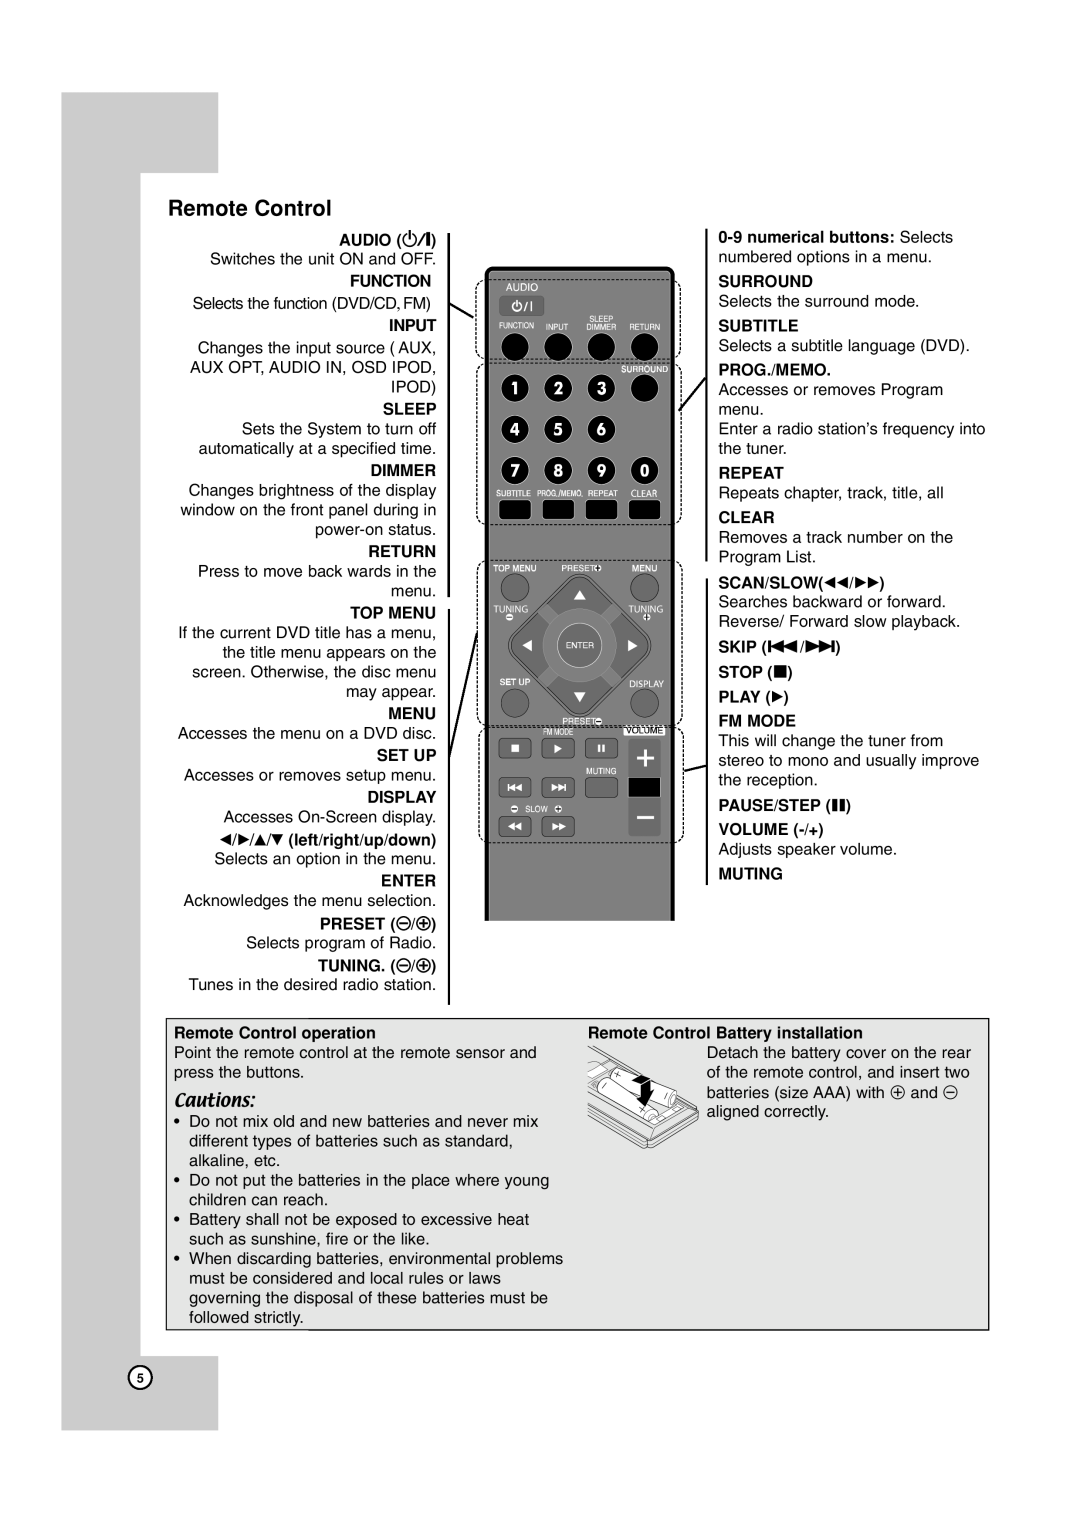 JVC TH-G40 TUNING. #/3, Remote Control, Audio, numerical buttons Selects, Function, Surround, Input, Subtitle, Prog./Memo 